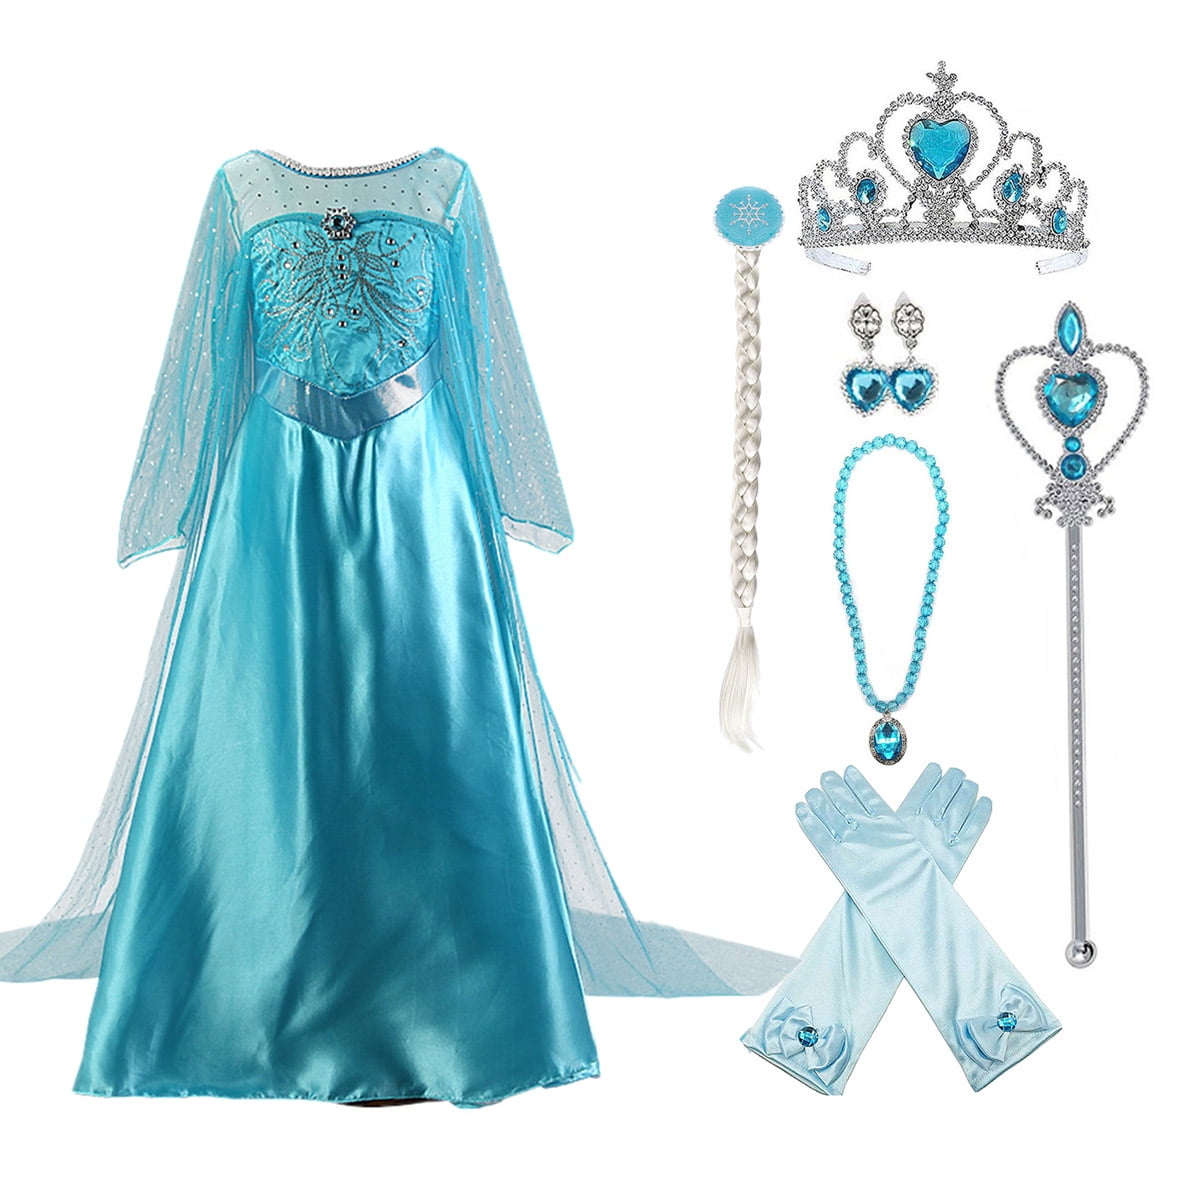 KAWELL Girls Princess Party Elsa Dress Little Girls Cosplay Costume with  Accessories,Size 4/5